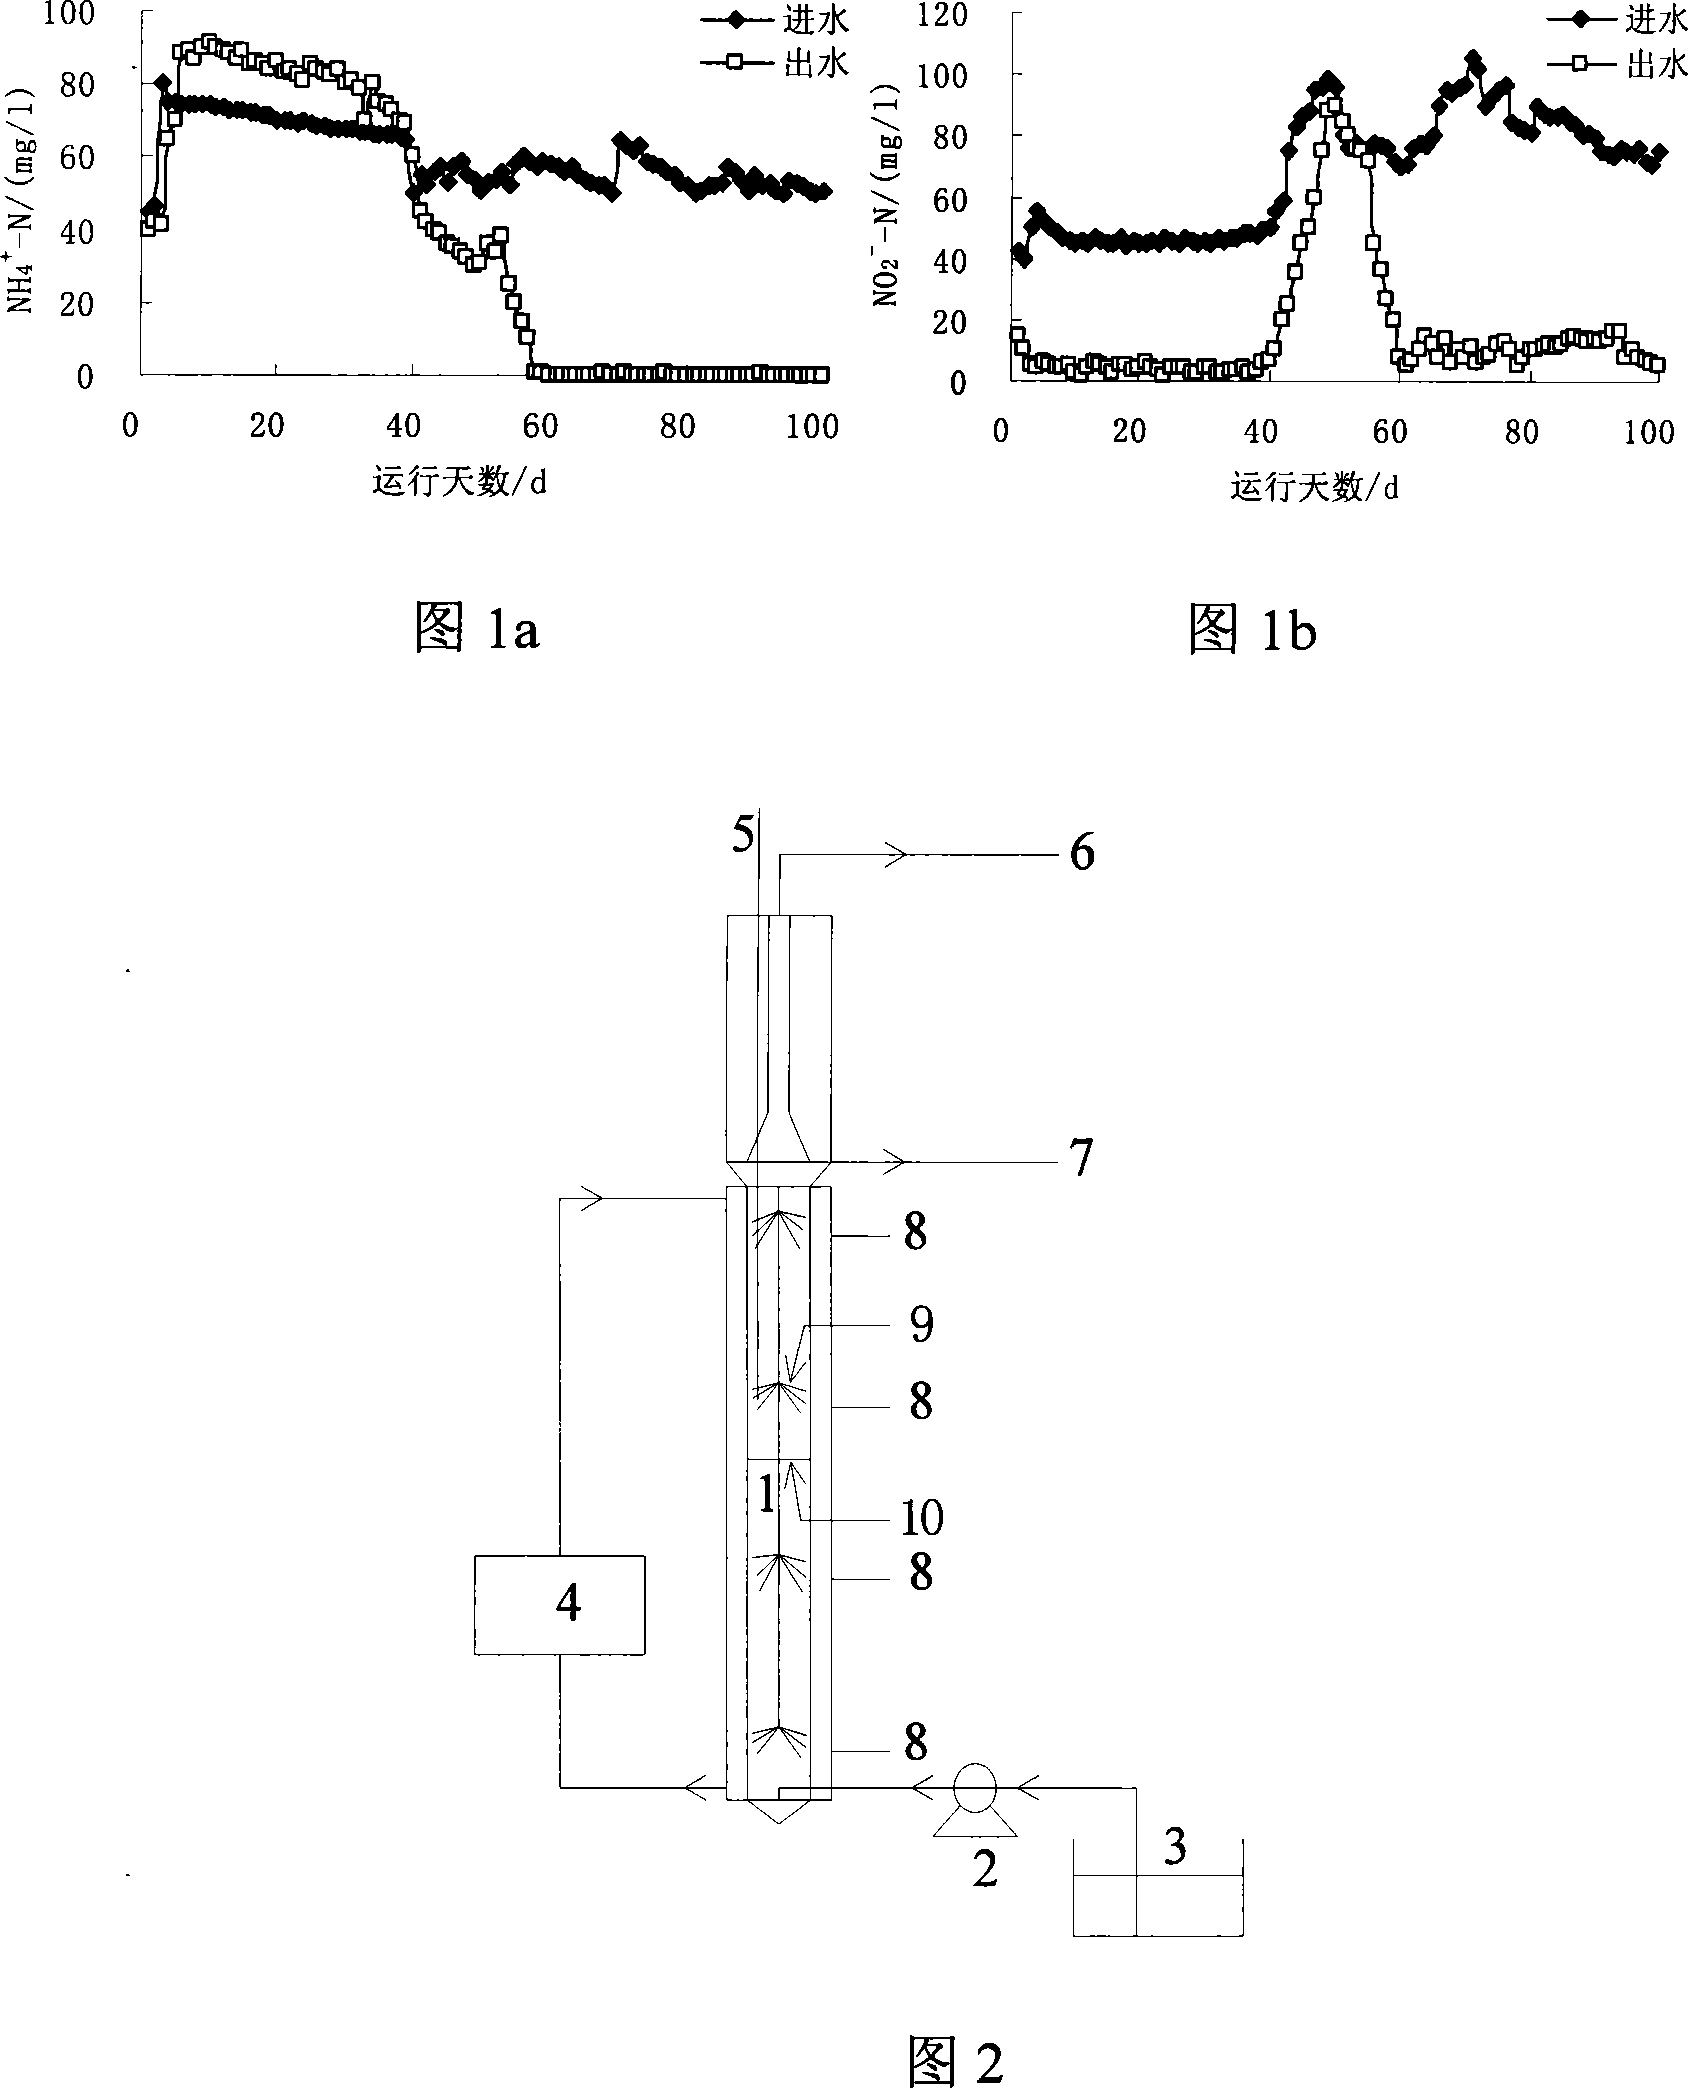 Method for rapidly culturing anaerobic ammonium oxidation bacteria by up-flow type anaerobic sludge bed reactor